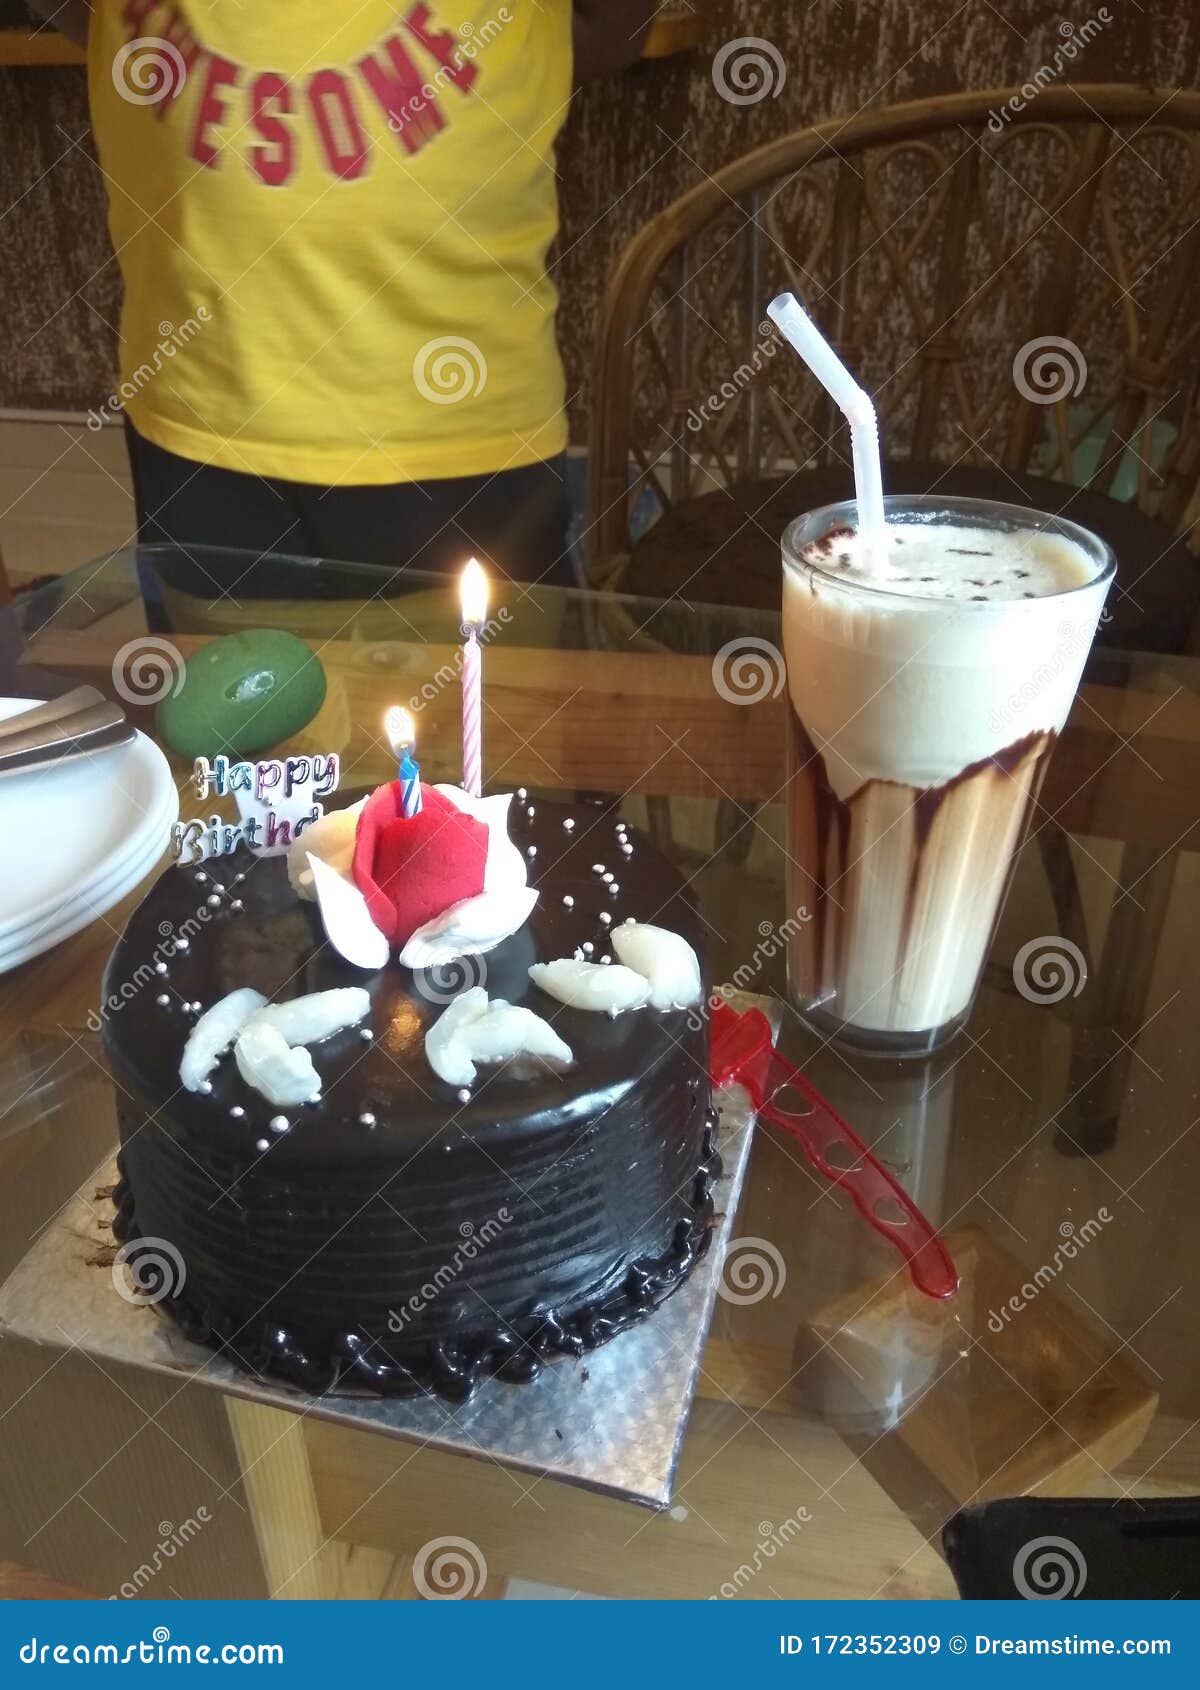 Big birthday cake with cream and candles on a blue table Desktop wallpapers  1152x864